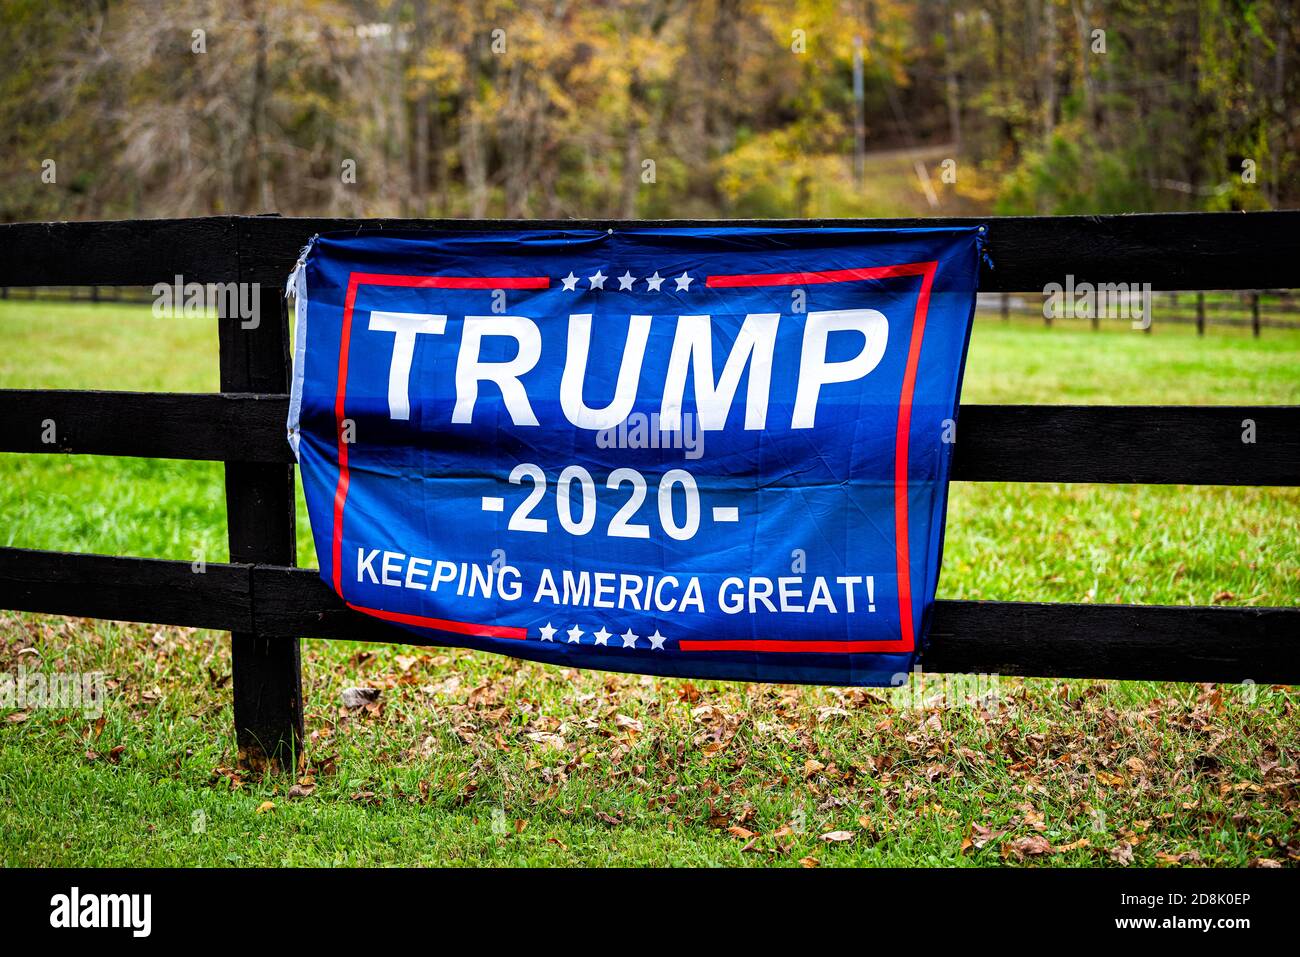 Donald Trump Official 2020 President Campaign Sign Poster Placard Trump KAG Blue 